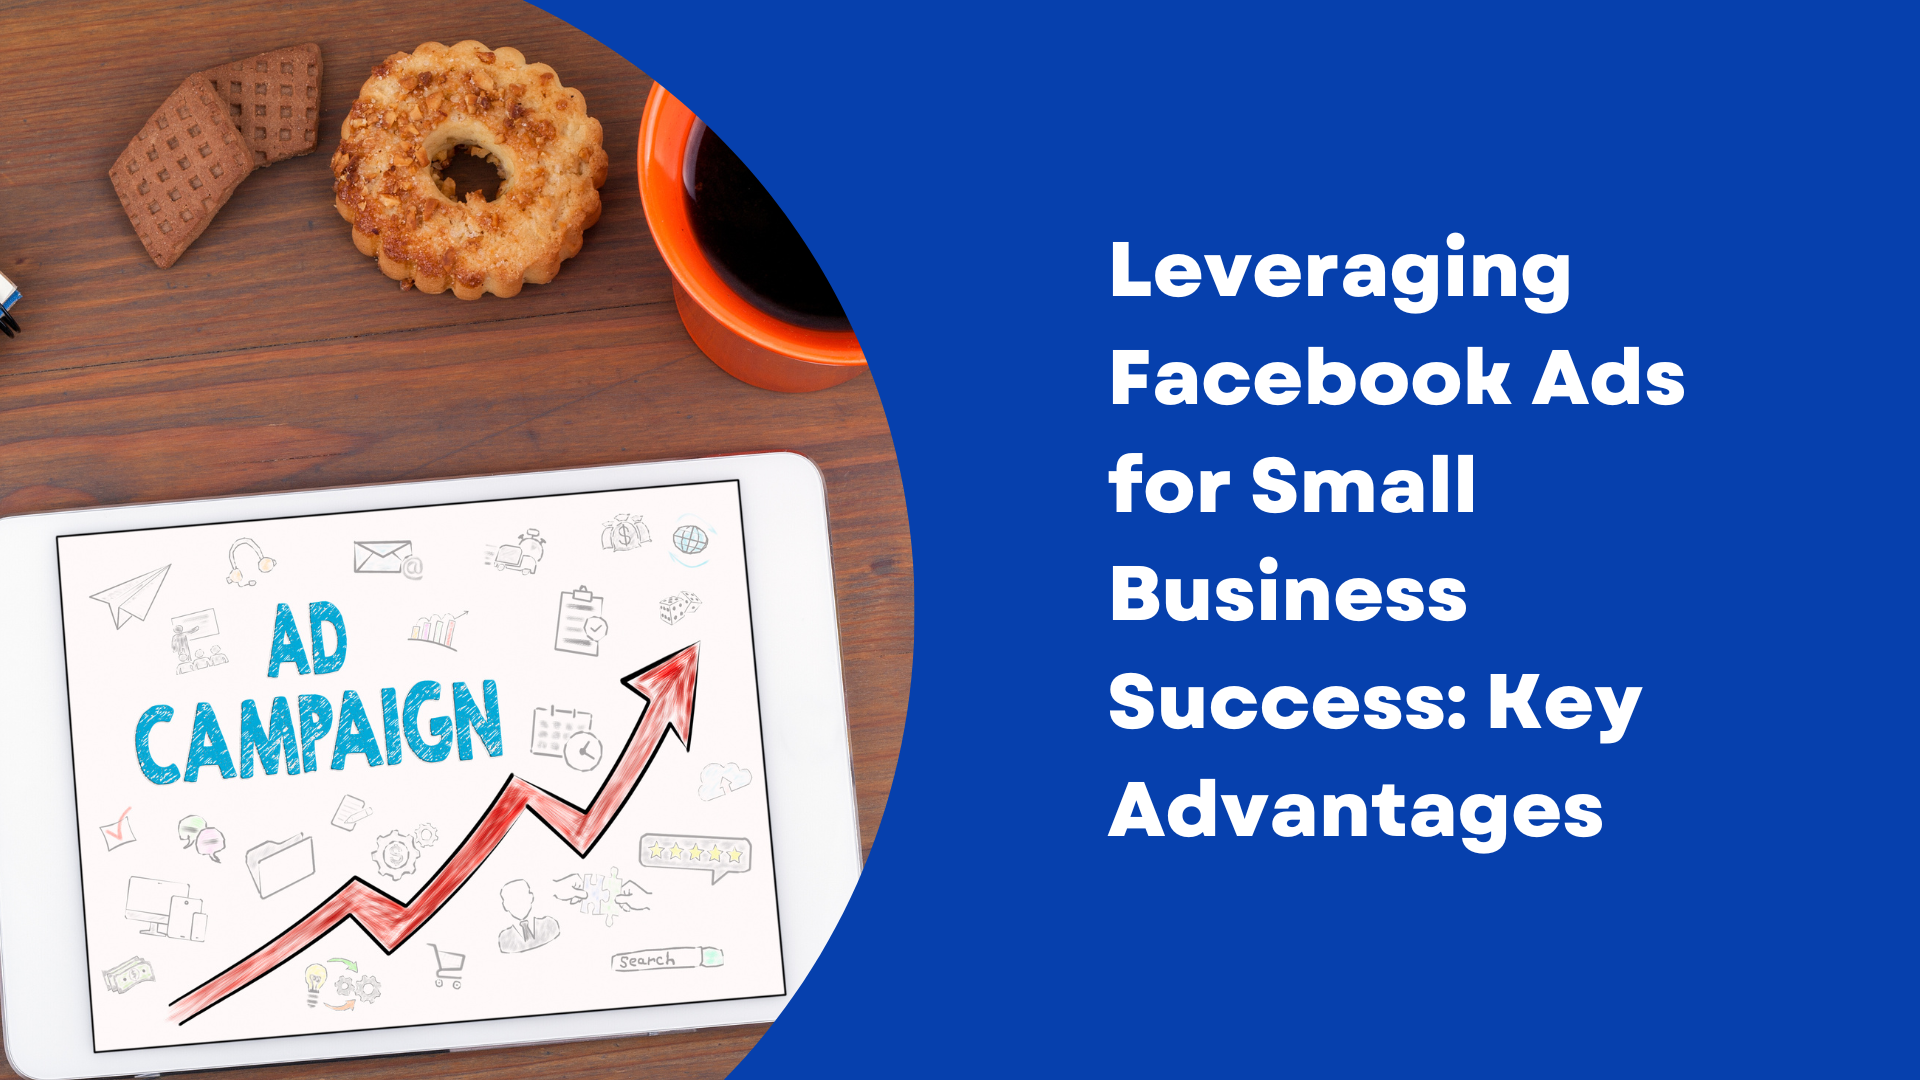 Leveraging Facebook Ads for Small Business: Key Advantages to Success